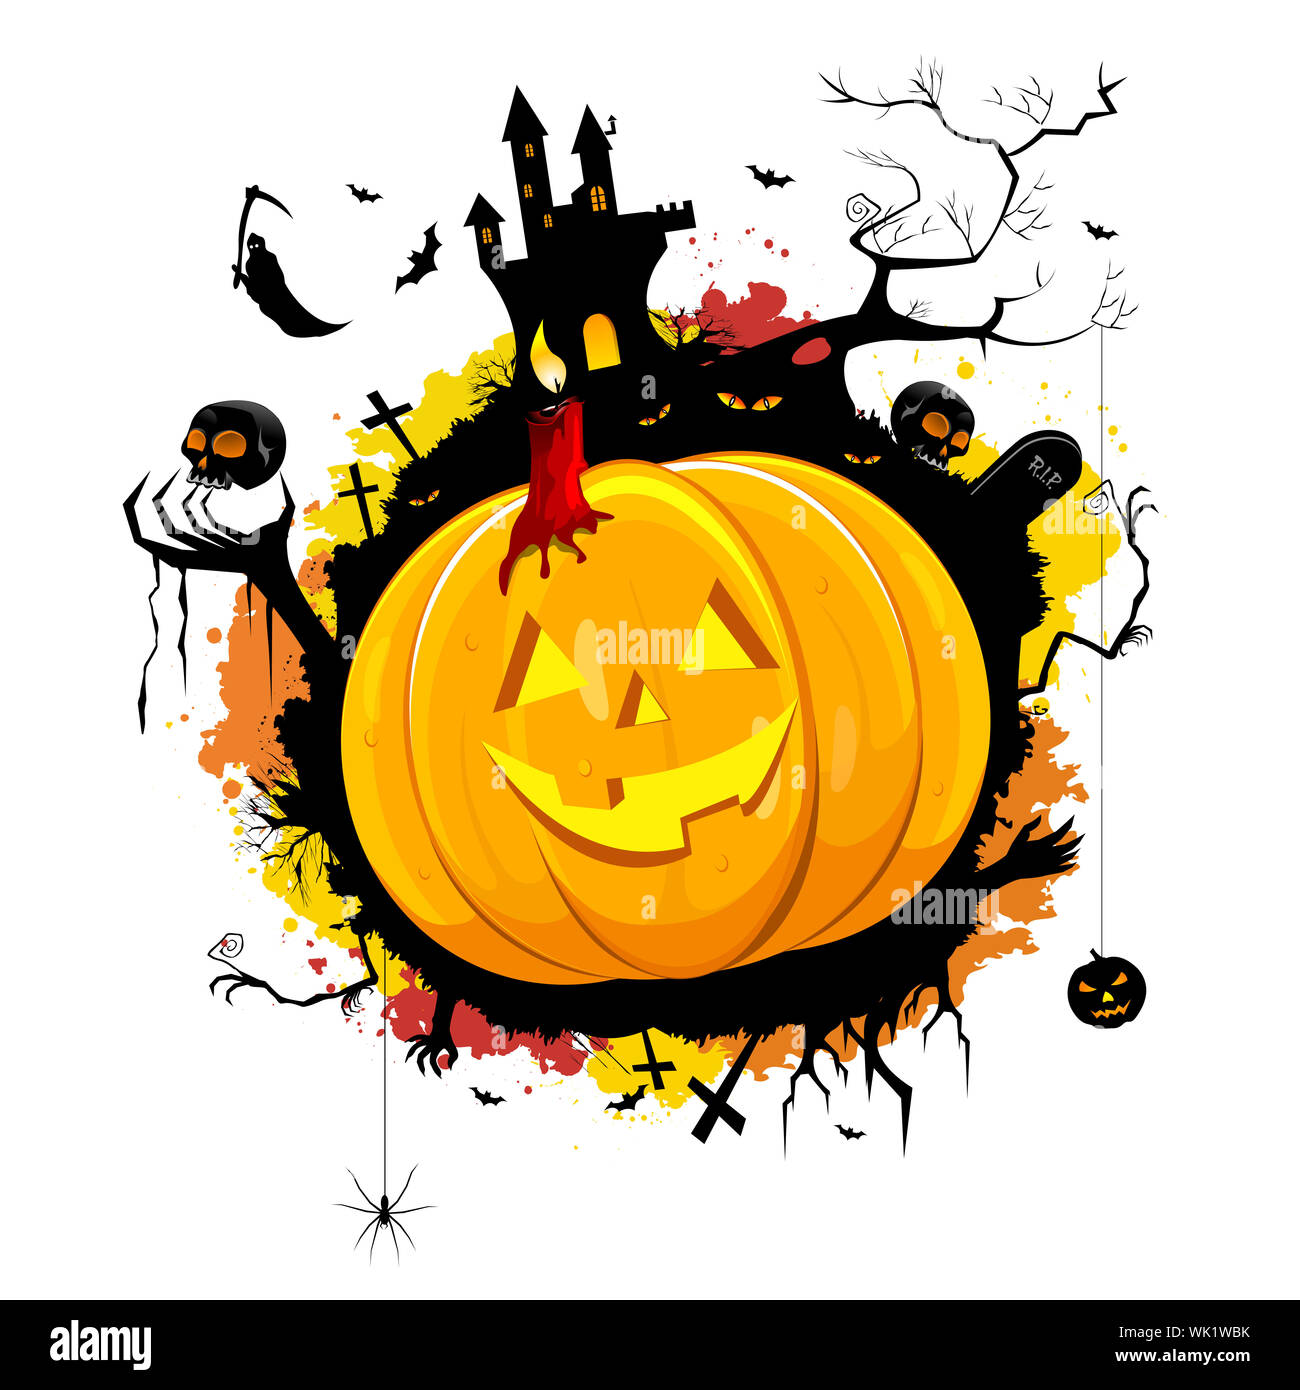 illustration of halloween pumpkin with different elements related to halloween Stock Photo